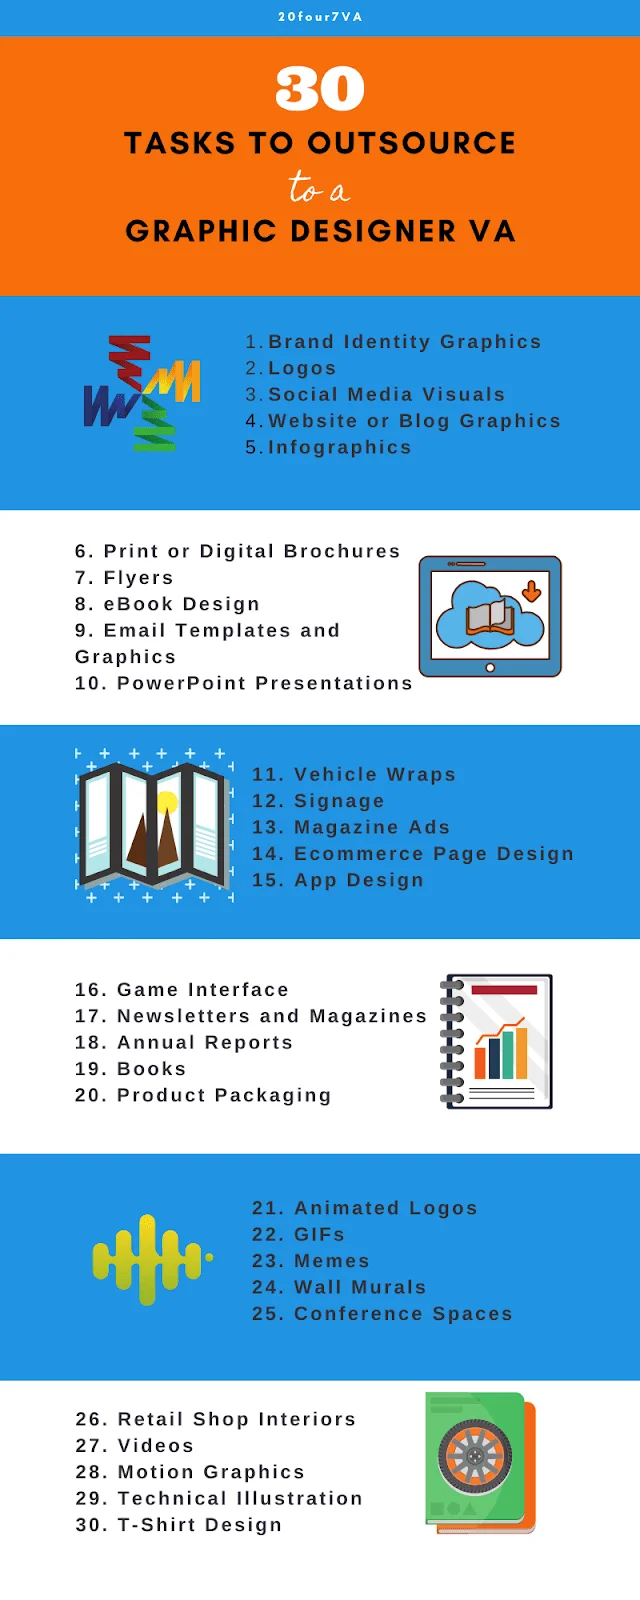 30 tasks you can outsource to a graphic designer virtual assistant - 20four7va